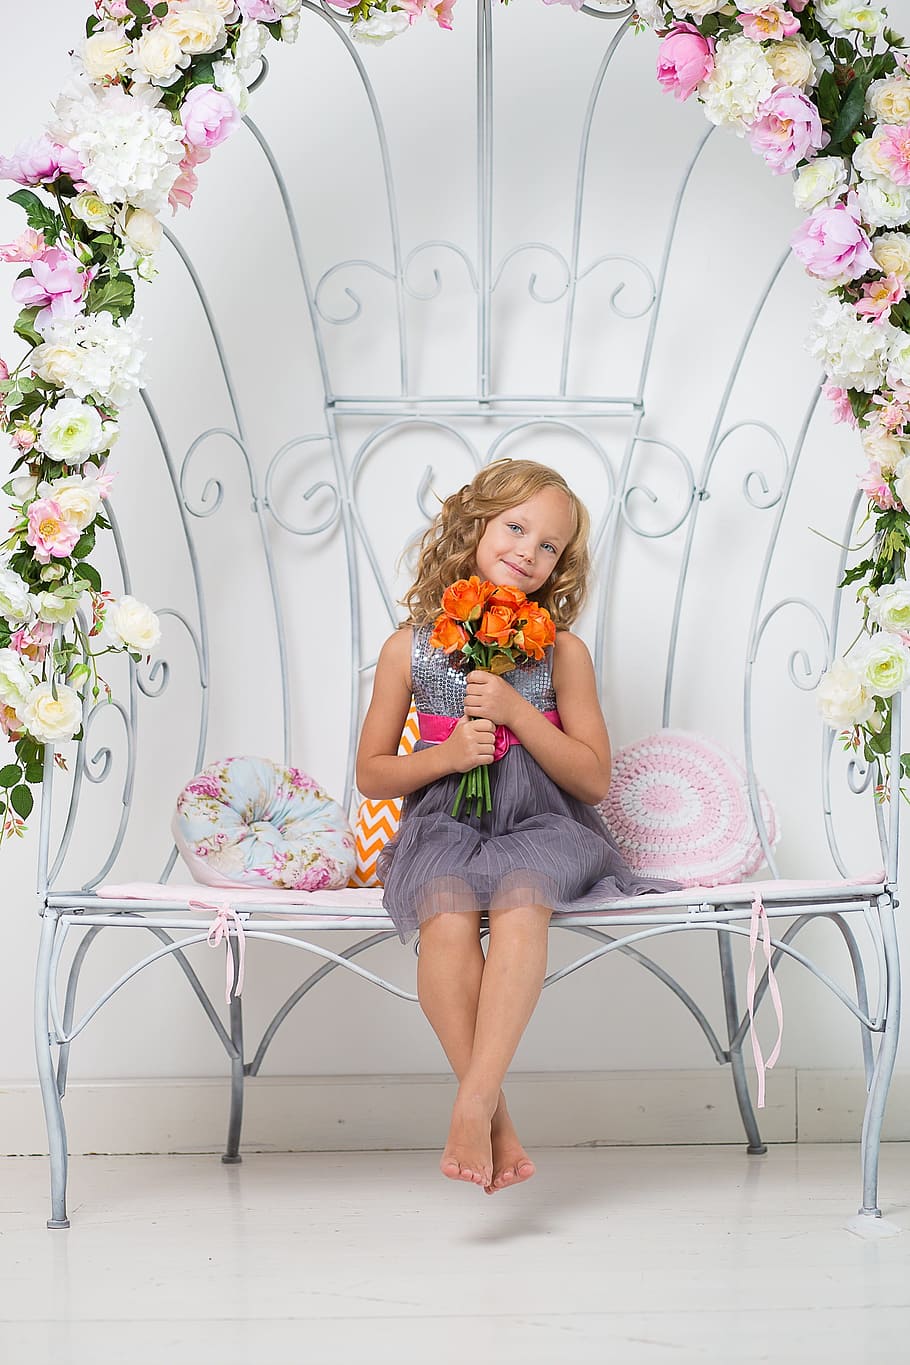 girl holding flowers wearing dress sitting on floral bench, child